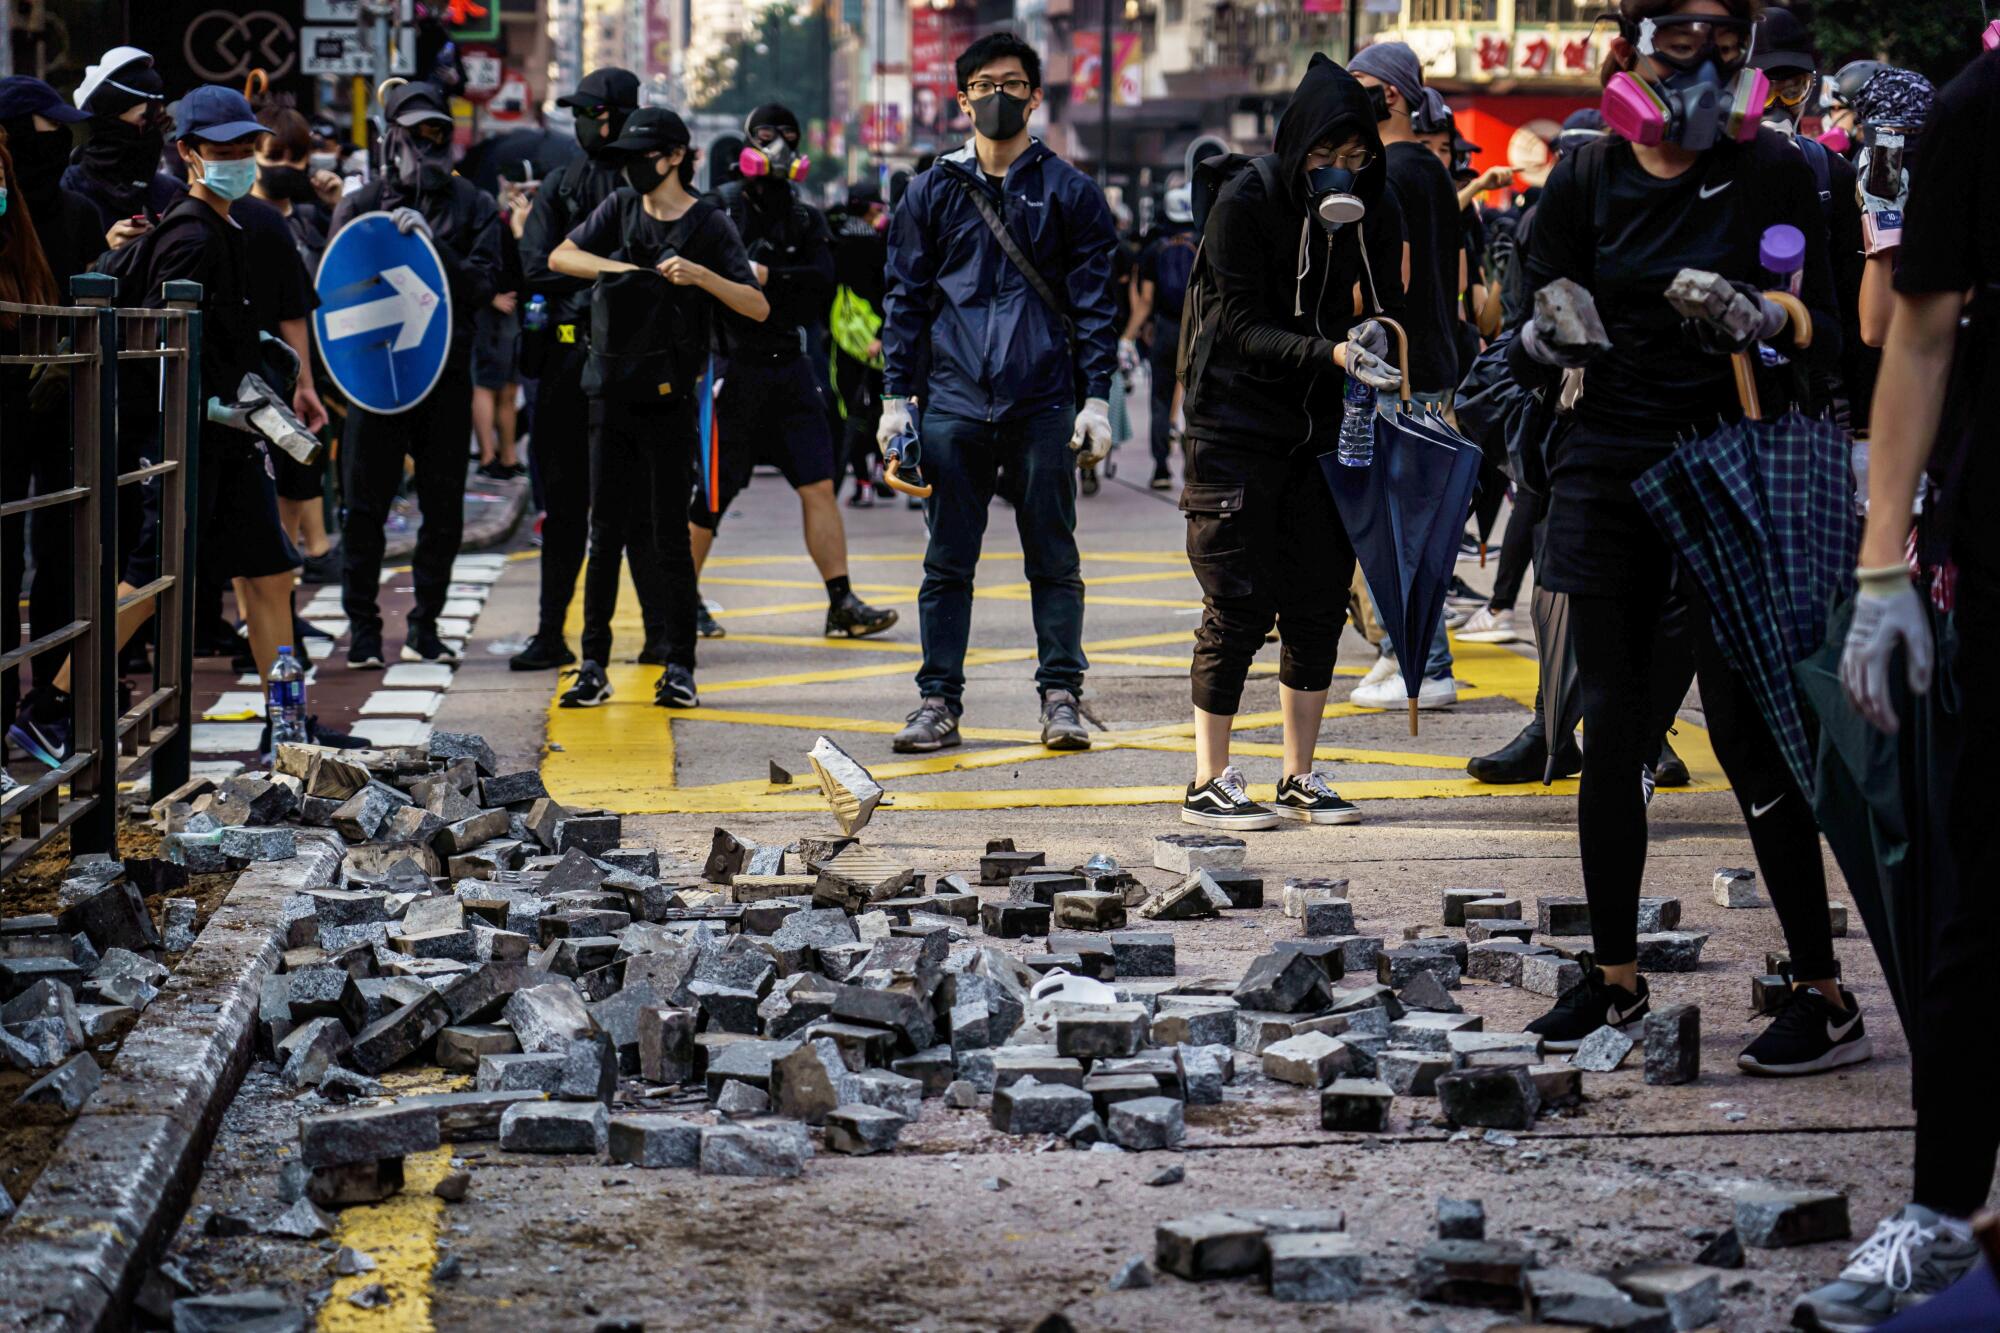 Protesters pull out bricks from the sidewalk to use as road blocks and for throwing, near the Jordan district of Hong Kong.